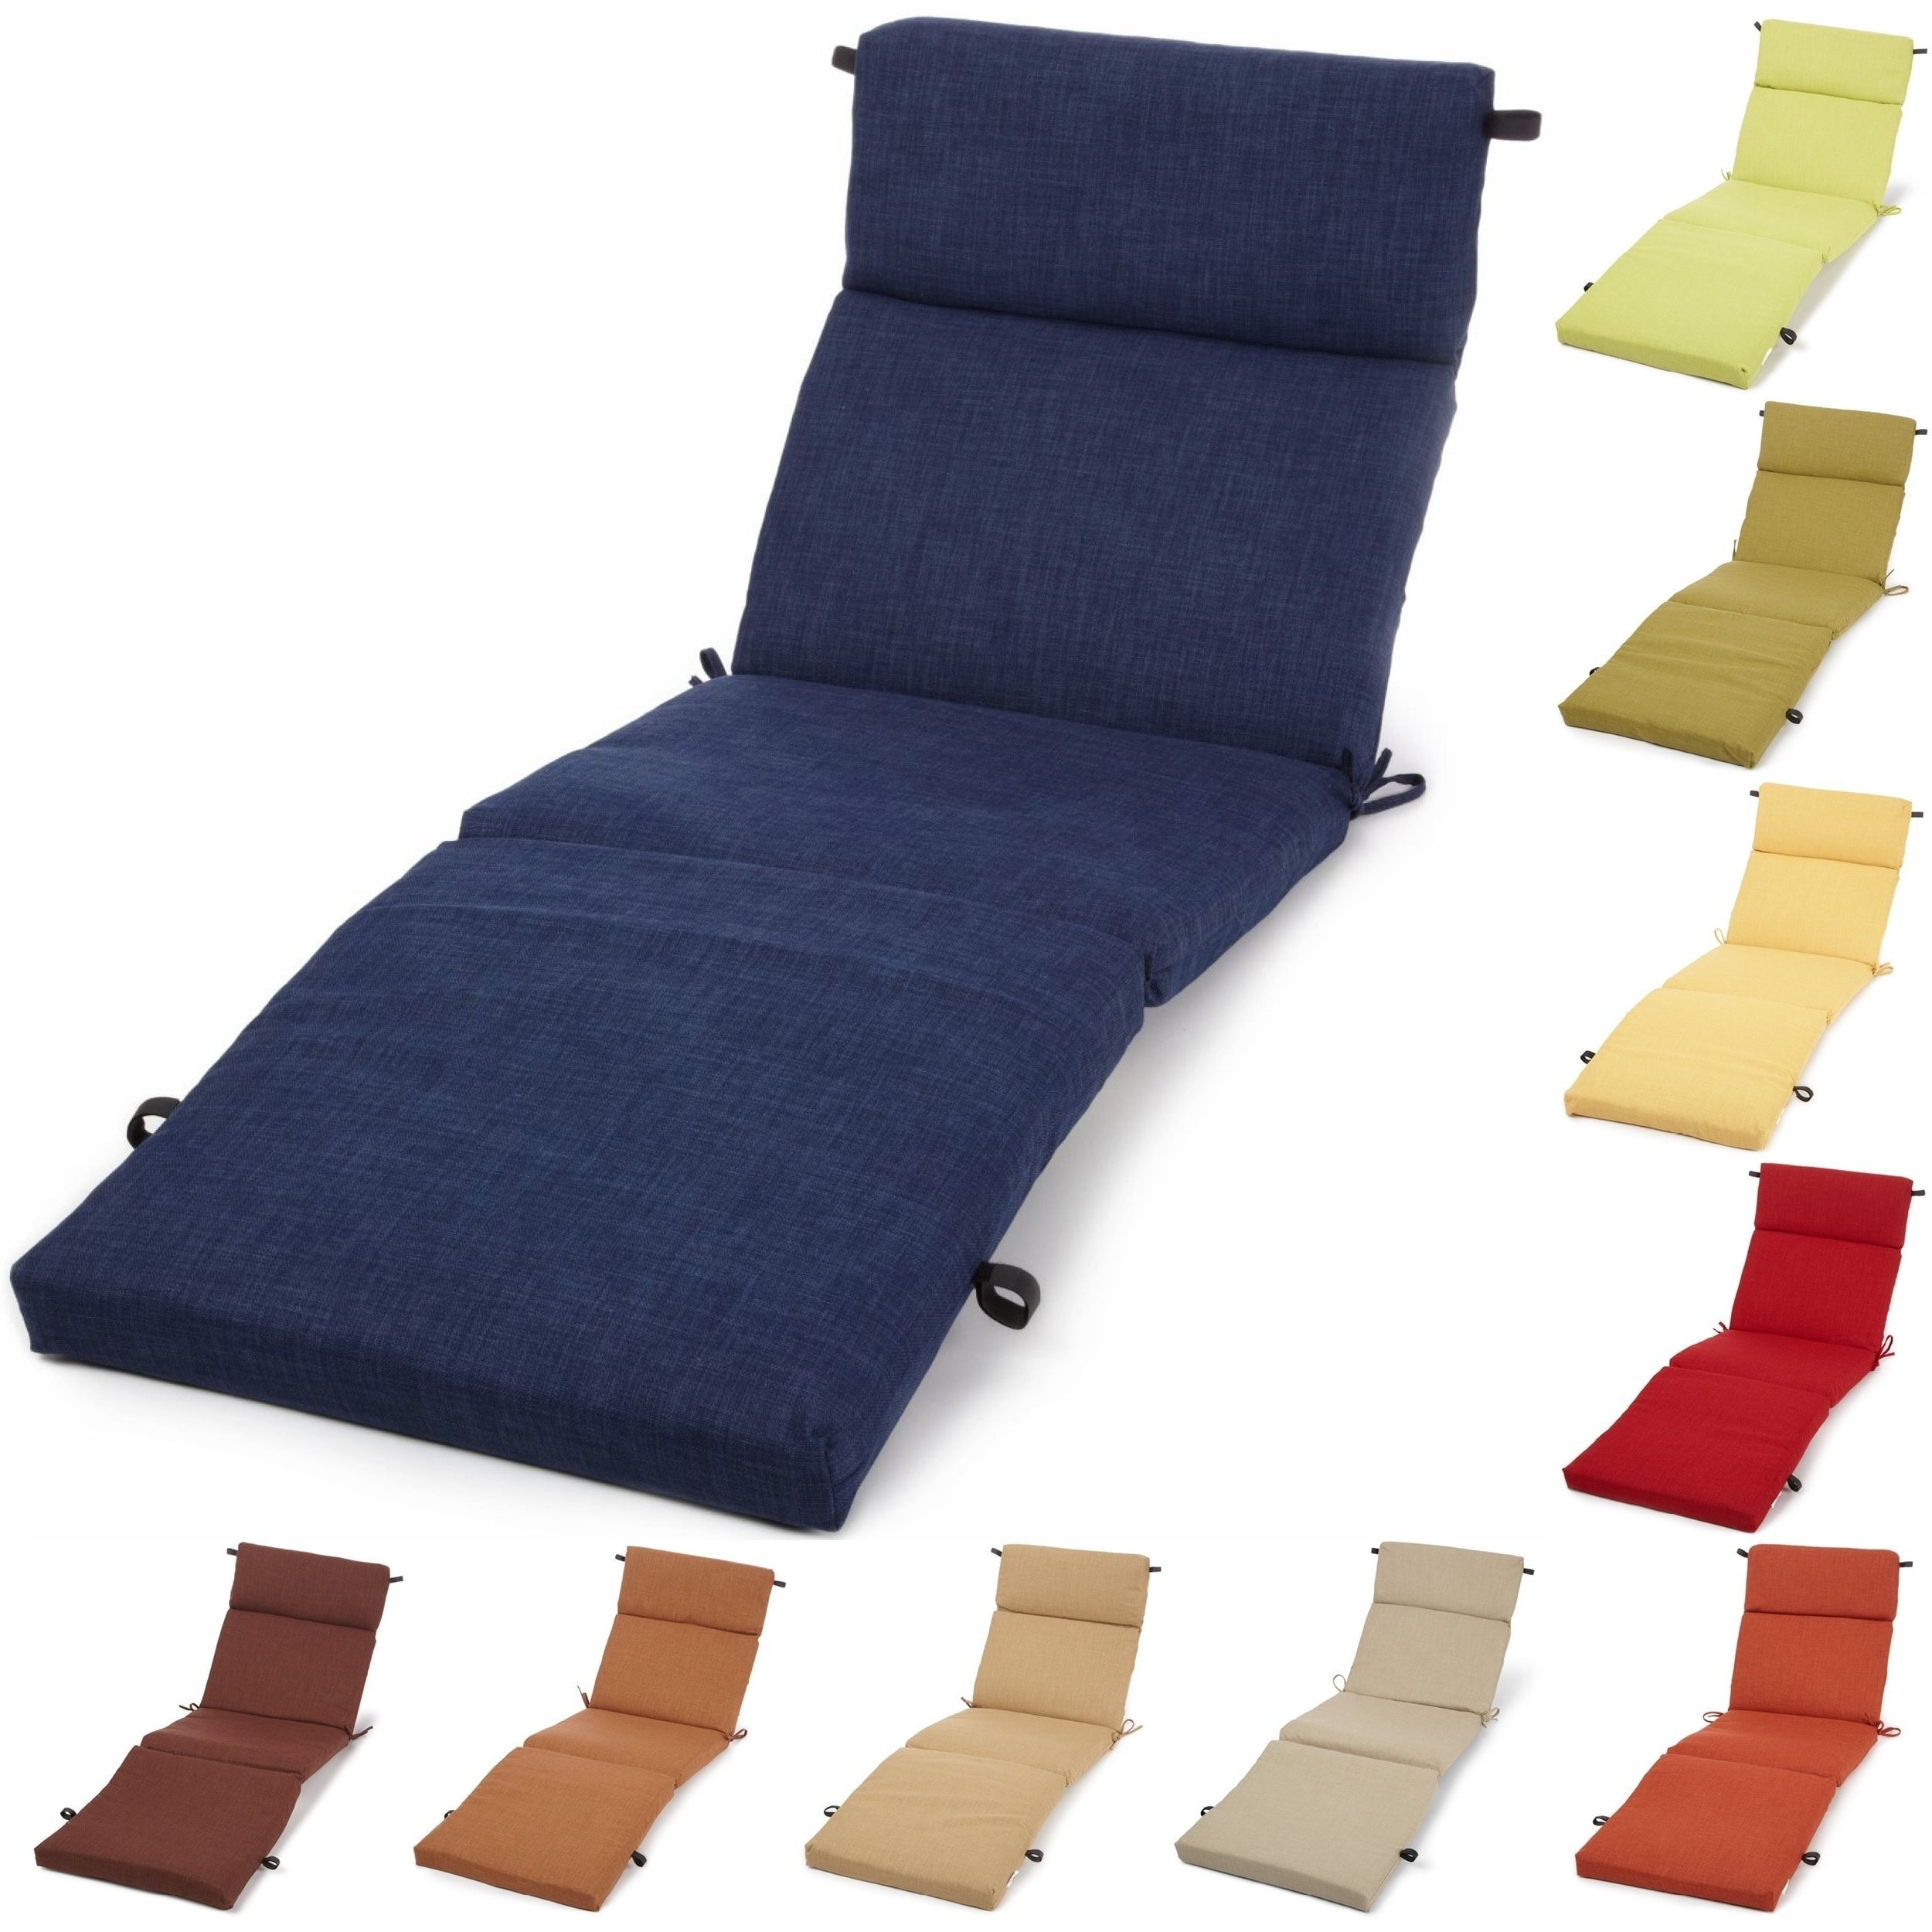 Chaise Lounge Outdoor Cushions Intended For Most Popular Blazing Needles Solid All Weather Uv Resistant Outdoor Chaise (View 5 of 15)